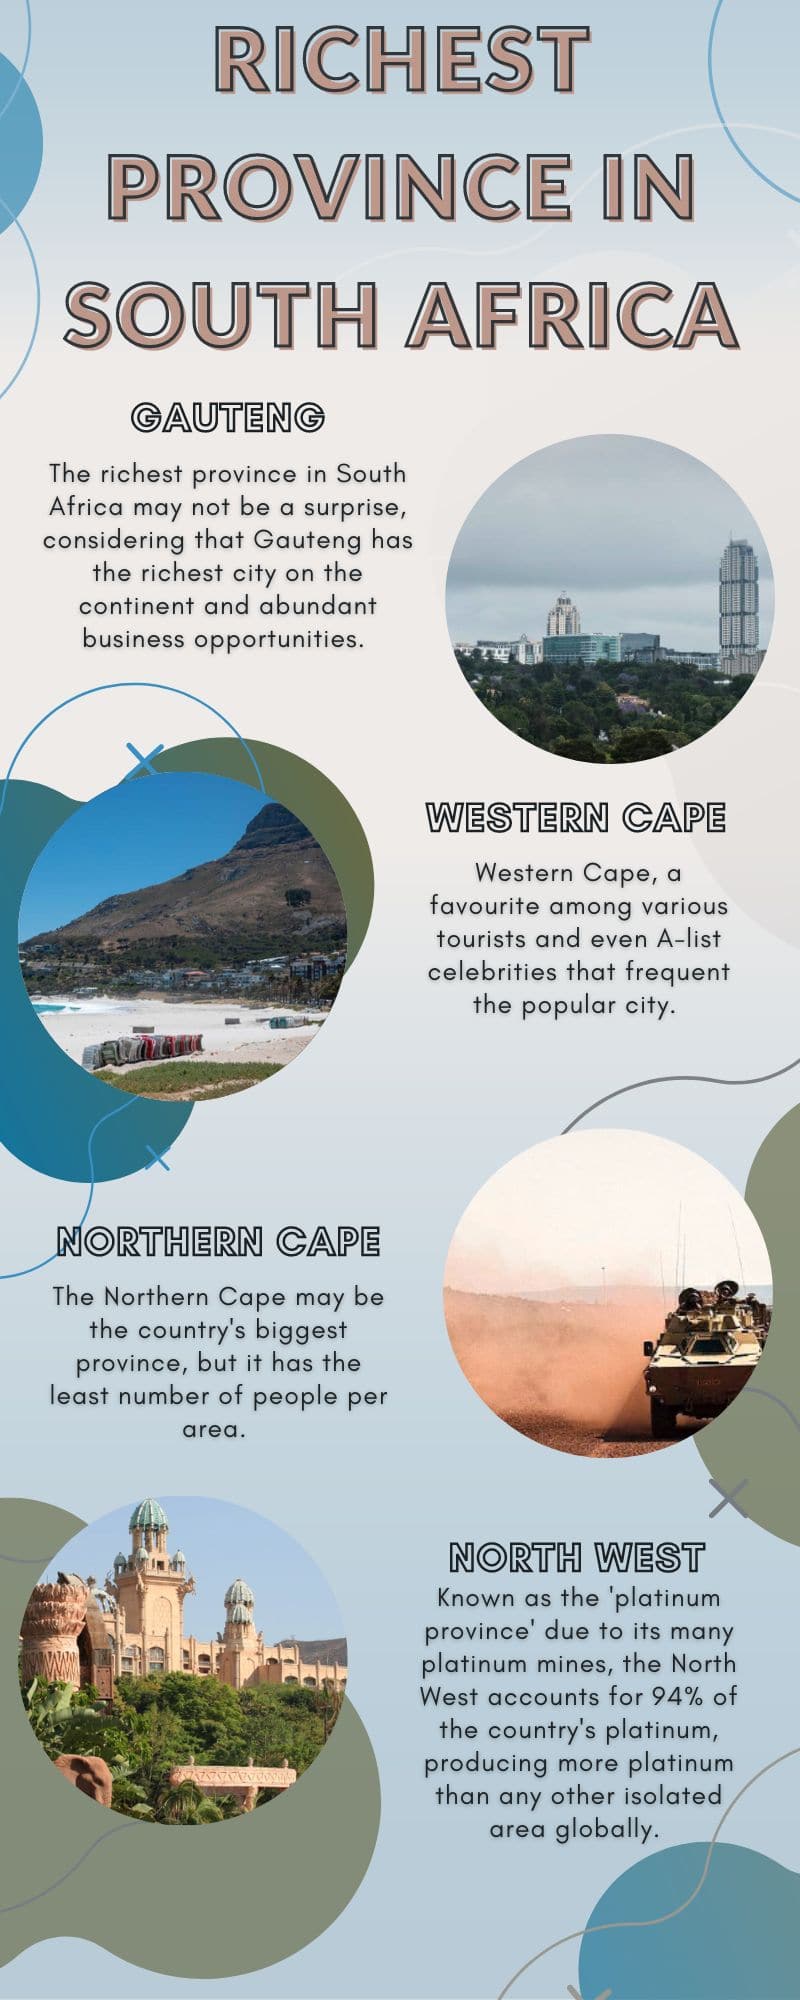 What is the richest province in South Africa